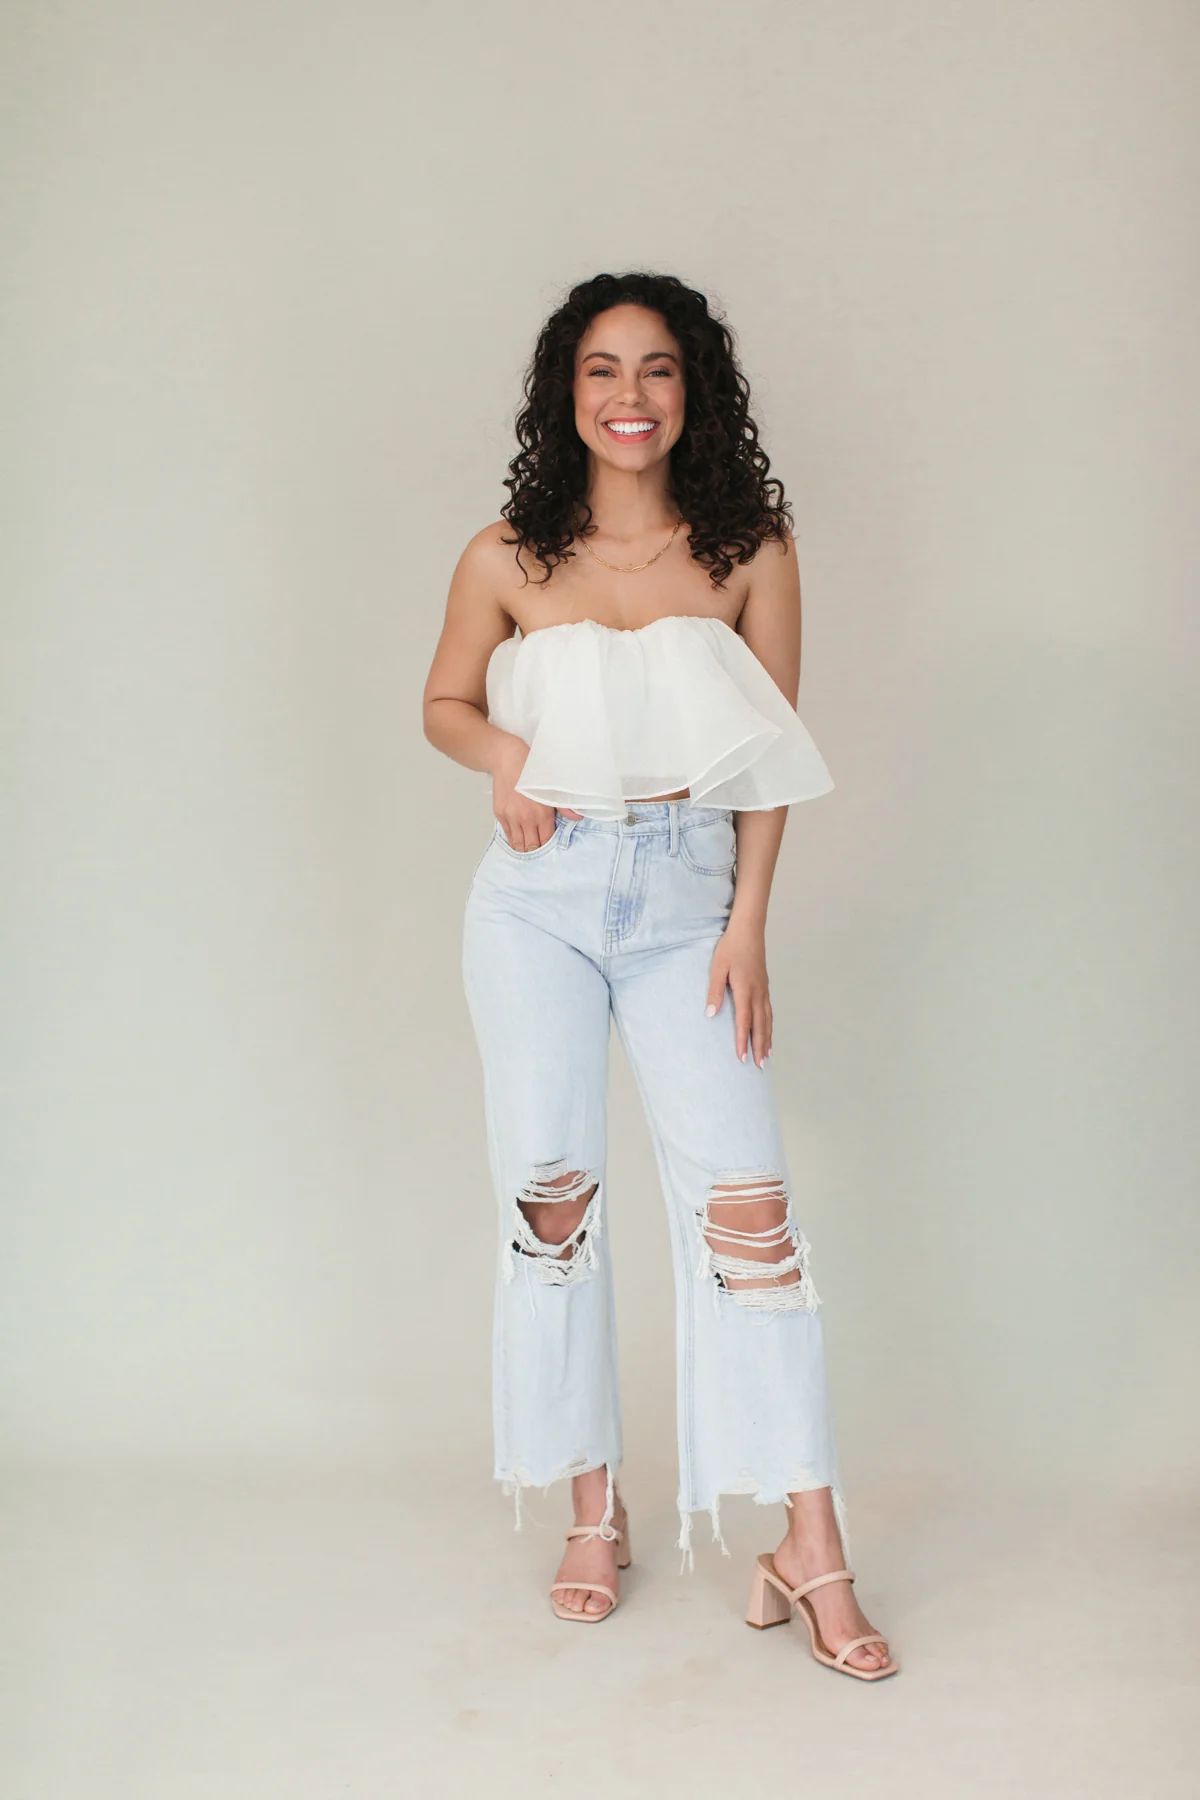 Evie Ivory Ruffle Cropped Tube Top - FINAL SALE | The Post